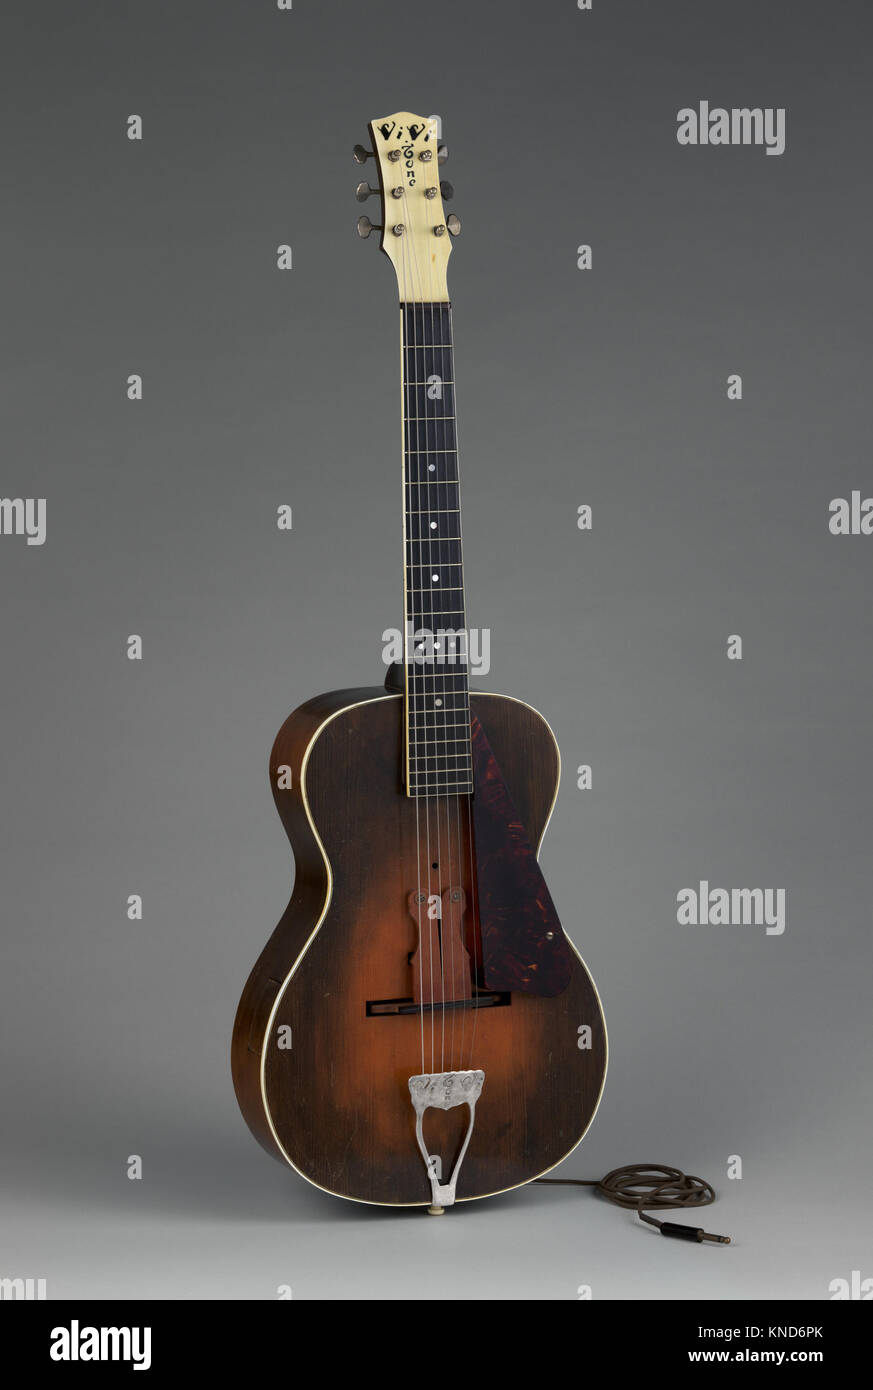 Acoustic-Electric Guitar MET DP-12319-022 718444 Maker: Vivi-Tone, American, Acoustic-Electric Guitar, ca. 1933, Spruce, maple, mahogany, ebony, Height: 39 1/8 in. (99.4 cm) Width (At lower bout): 13 1/8 in. (33.3 cm) Depth (At side of rim): 3 3/4 in. (9.5 cm). The Metropolitan Museum of Art, New York. Purchase, Steve Miller Gift, 2016 (2016.415a, b) Stock Photo